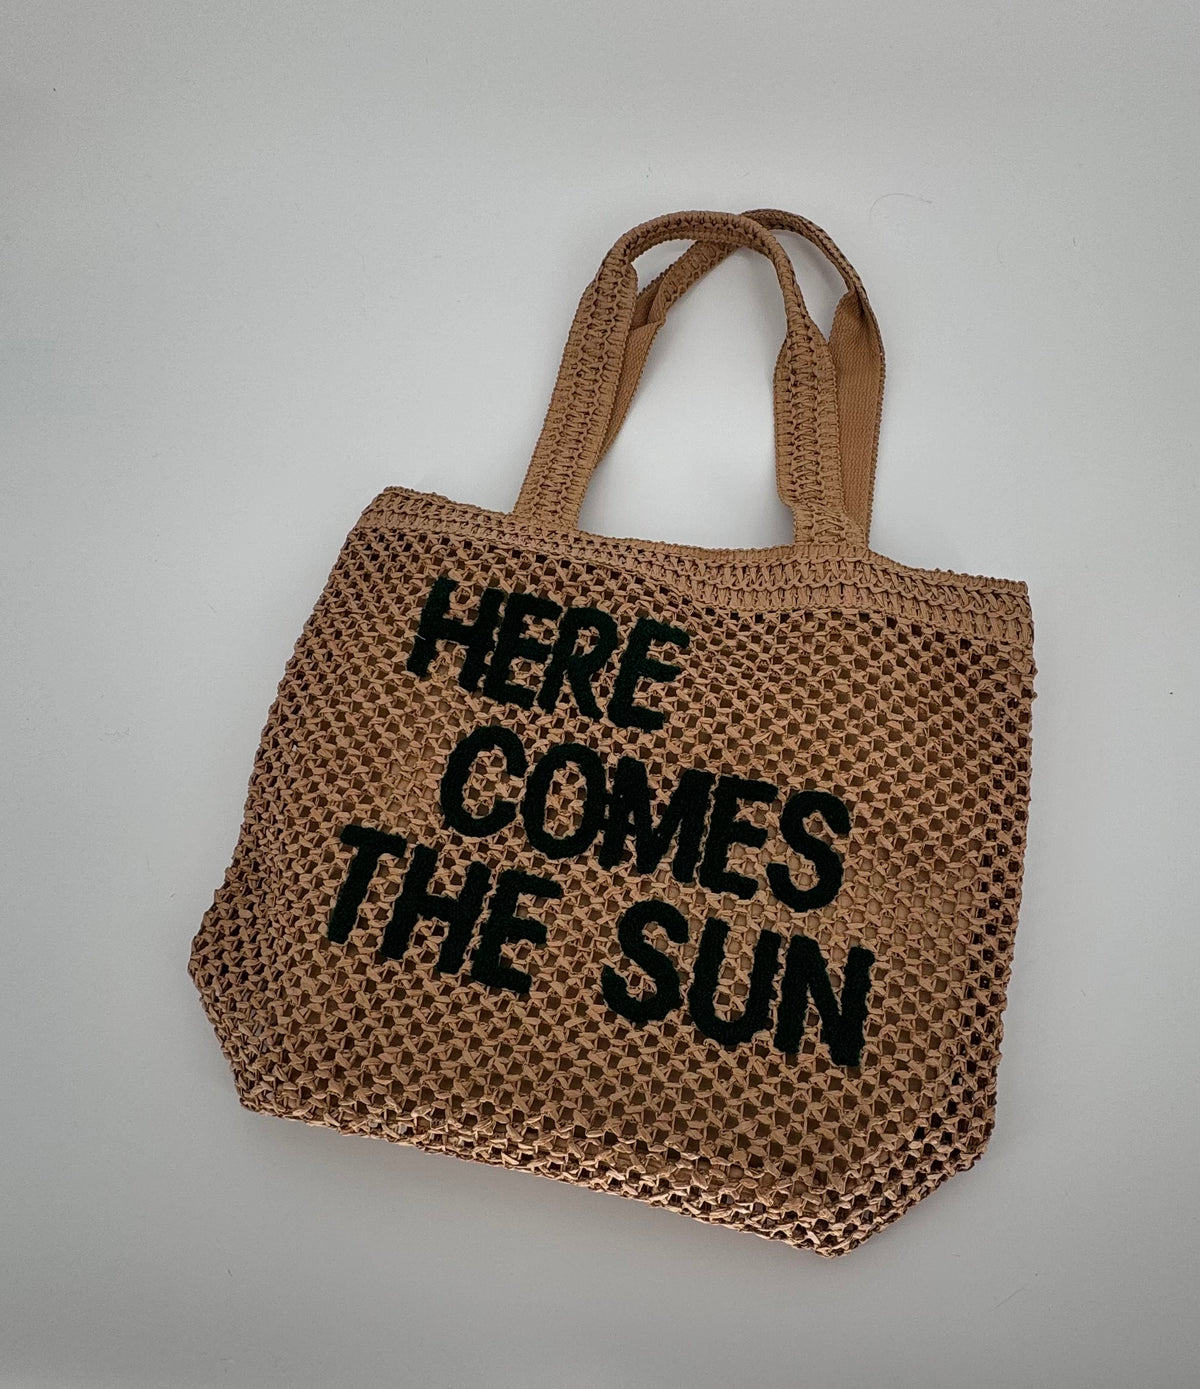 Woven, ‘Here Comes The Sun’ shoulder bag